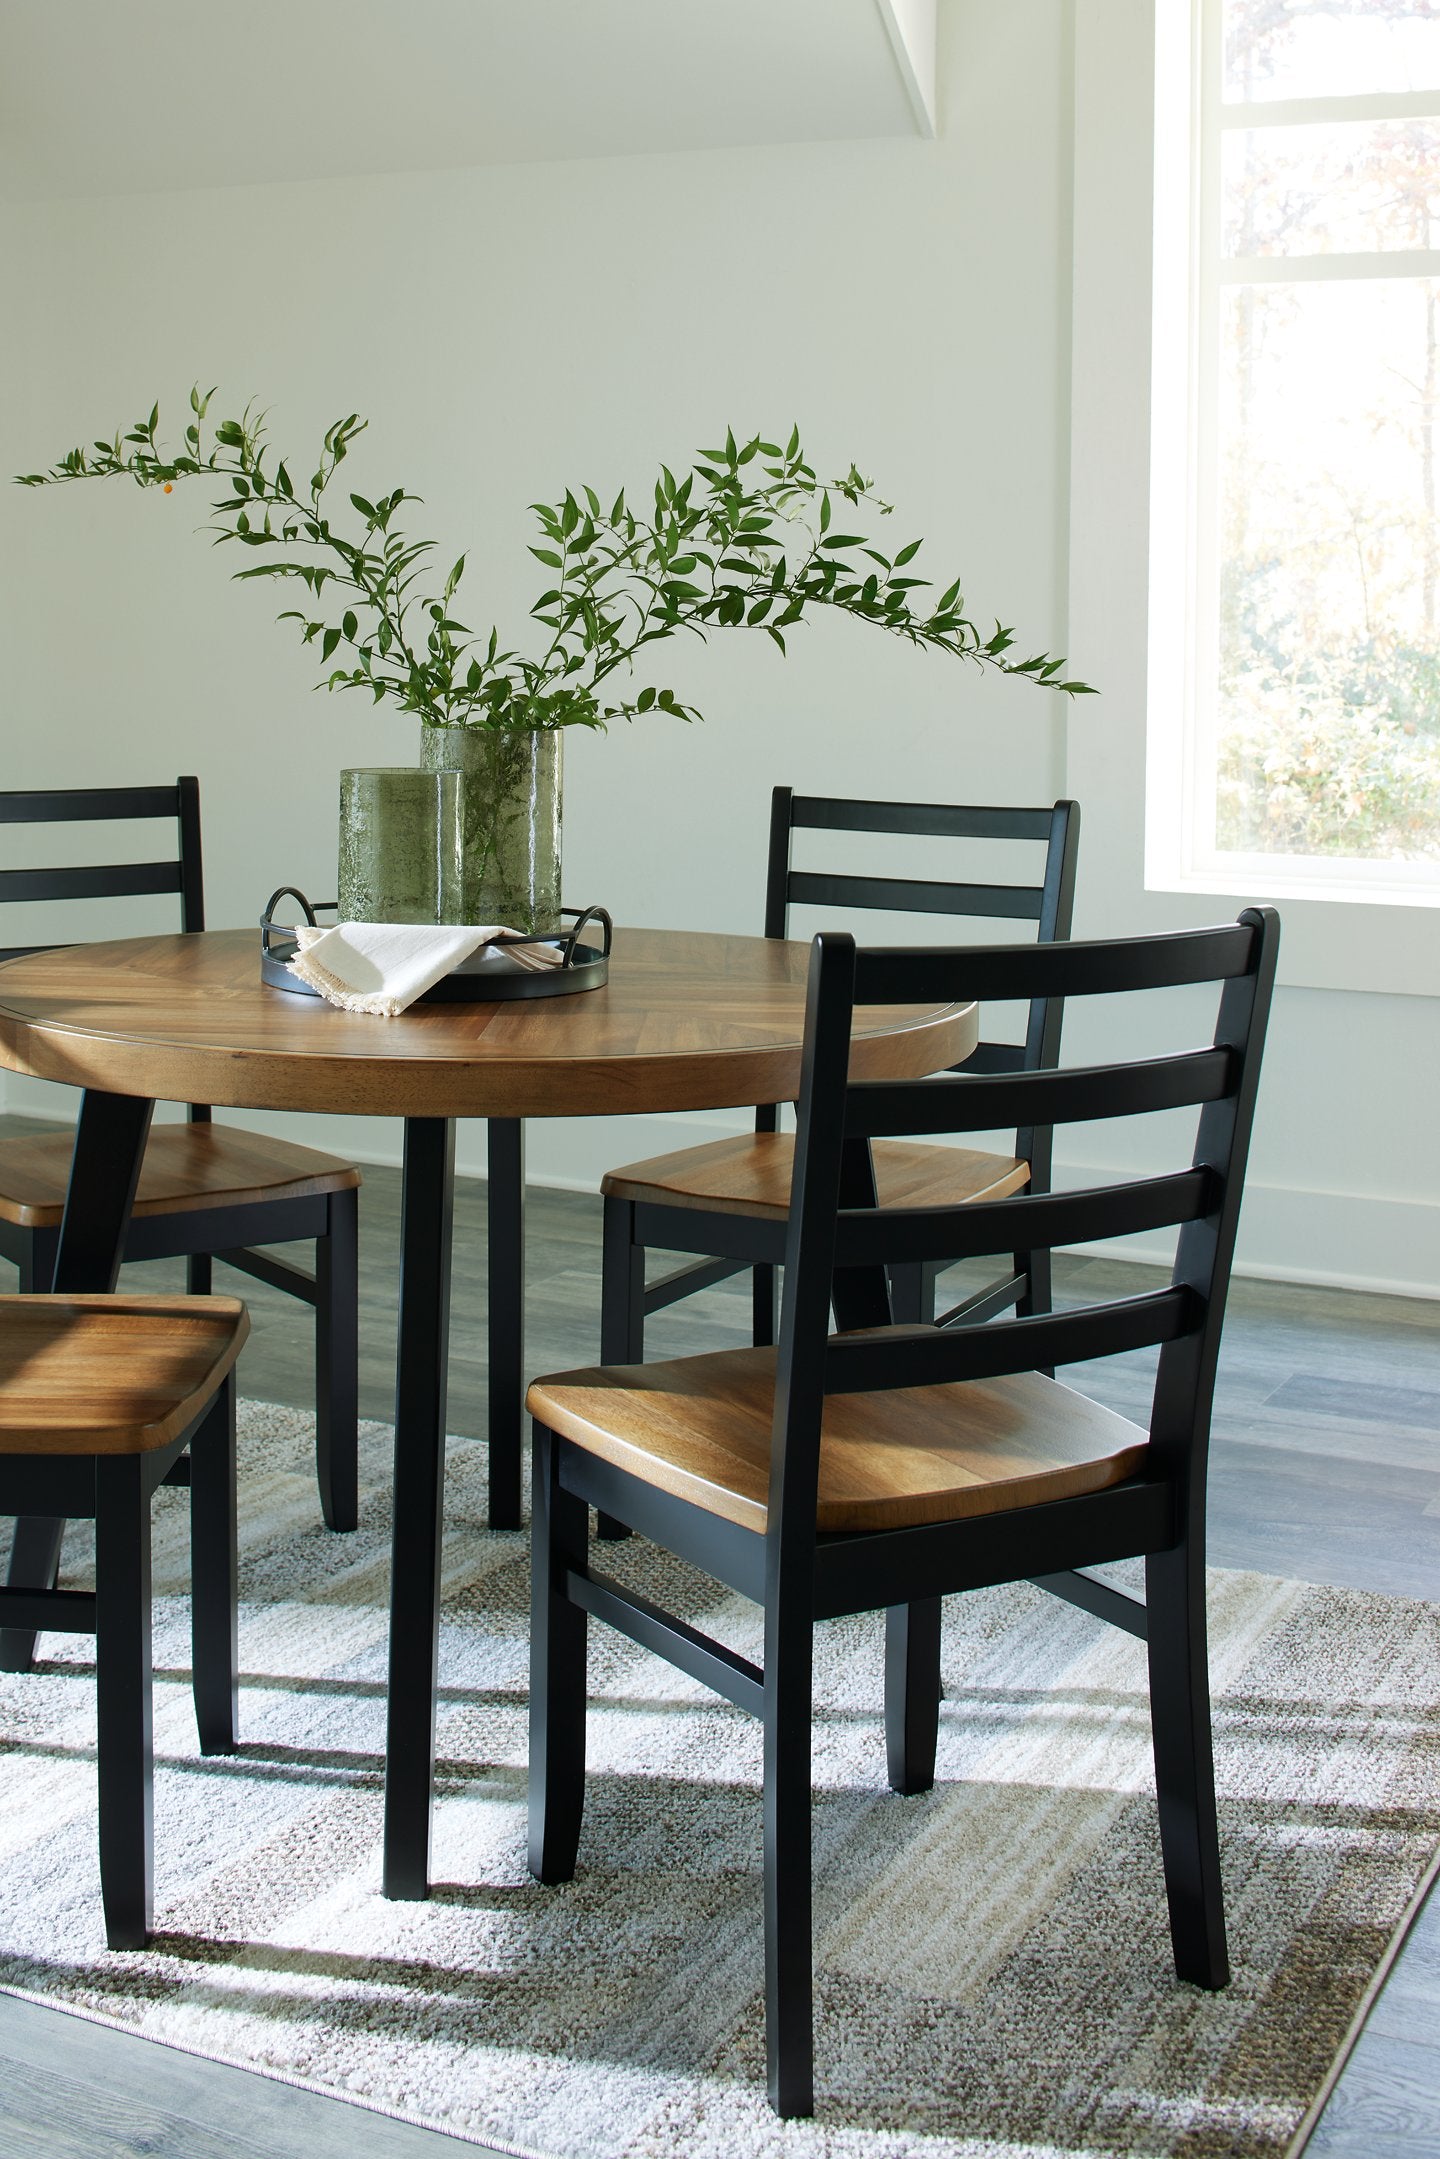 Blondon Dining Table and 4 Chairs (Set of 5) - Half Price Furniture